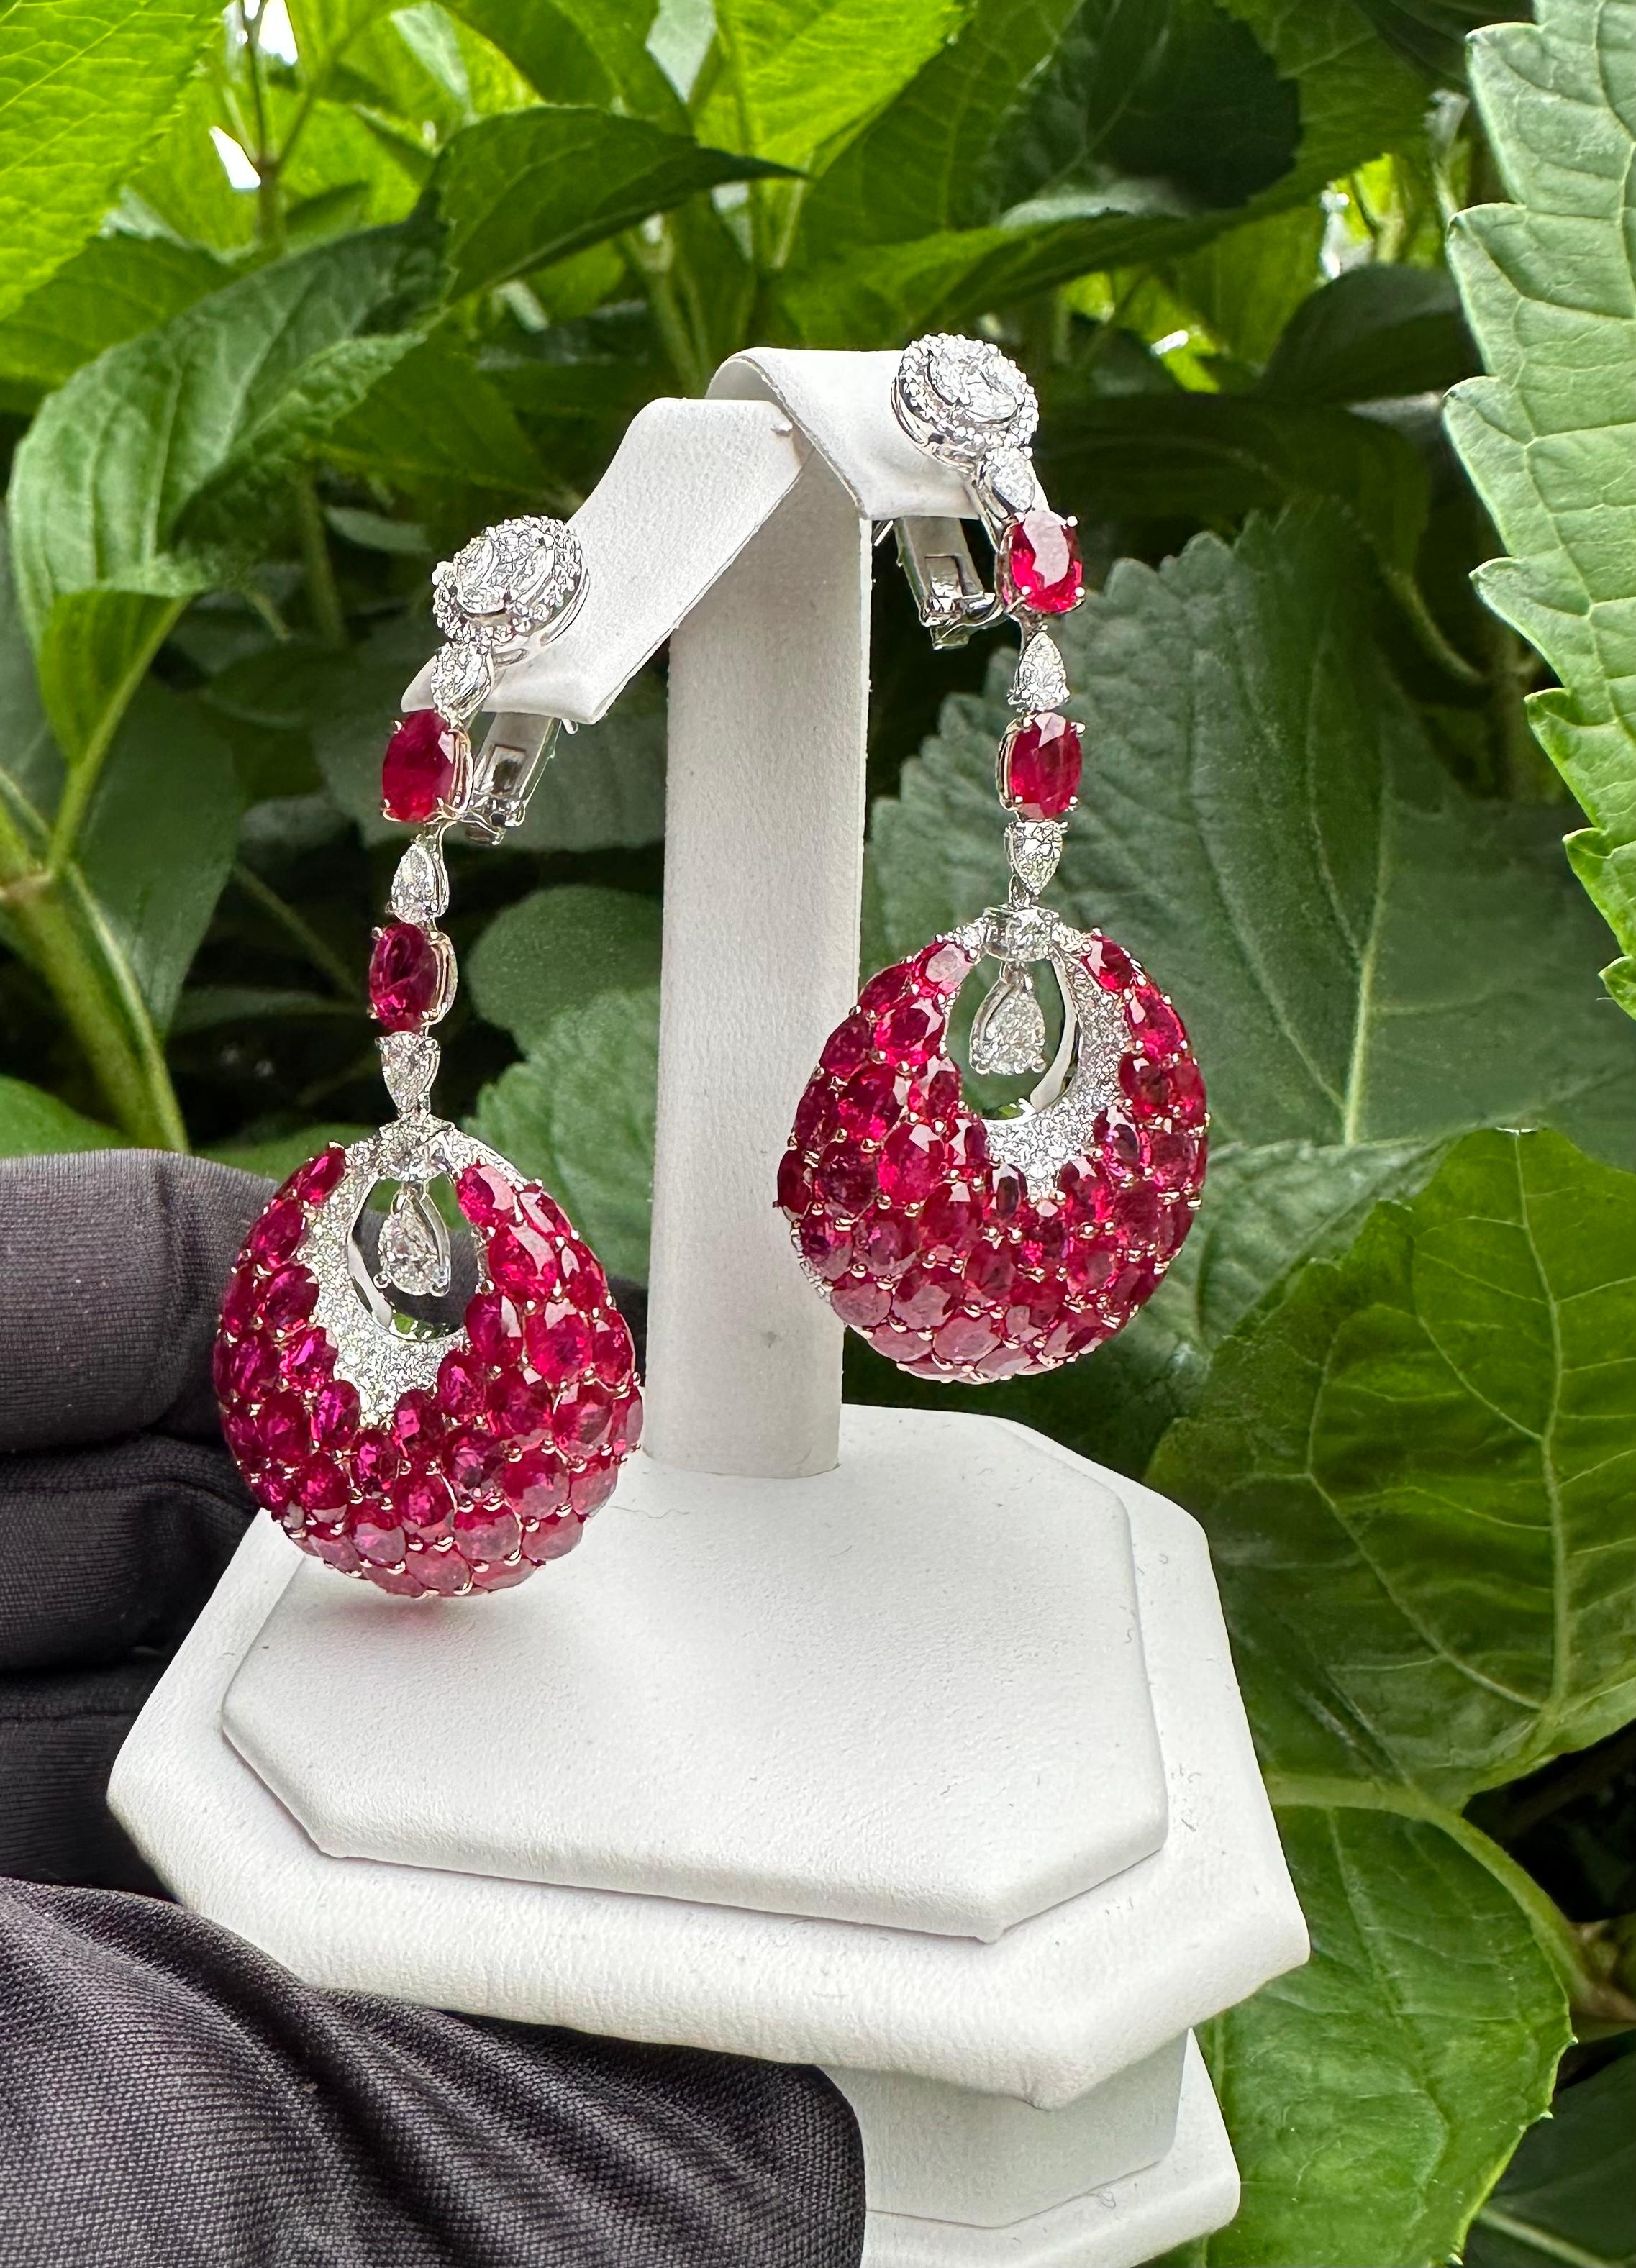 Very opulent, ladies estate 18 karat white gold, 35.21 carat Burmese ruby and diamond earrings feature the finest quality Burmese rubies and D color white sparkling diamonds. On the bottom of each earring, an elegant open circular pear shaped drop